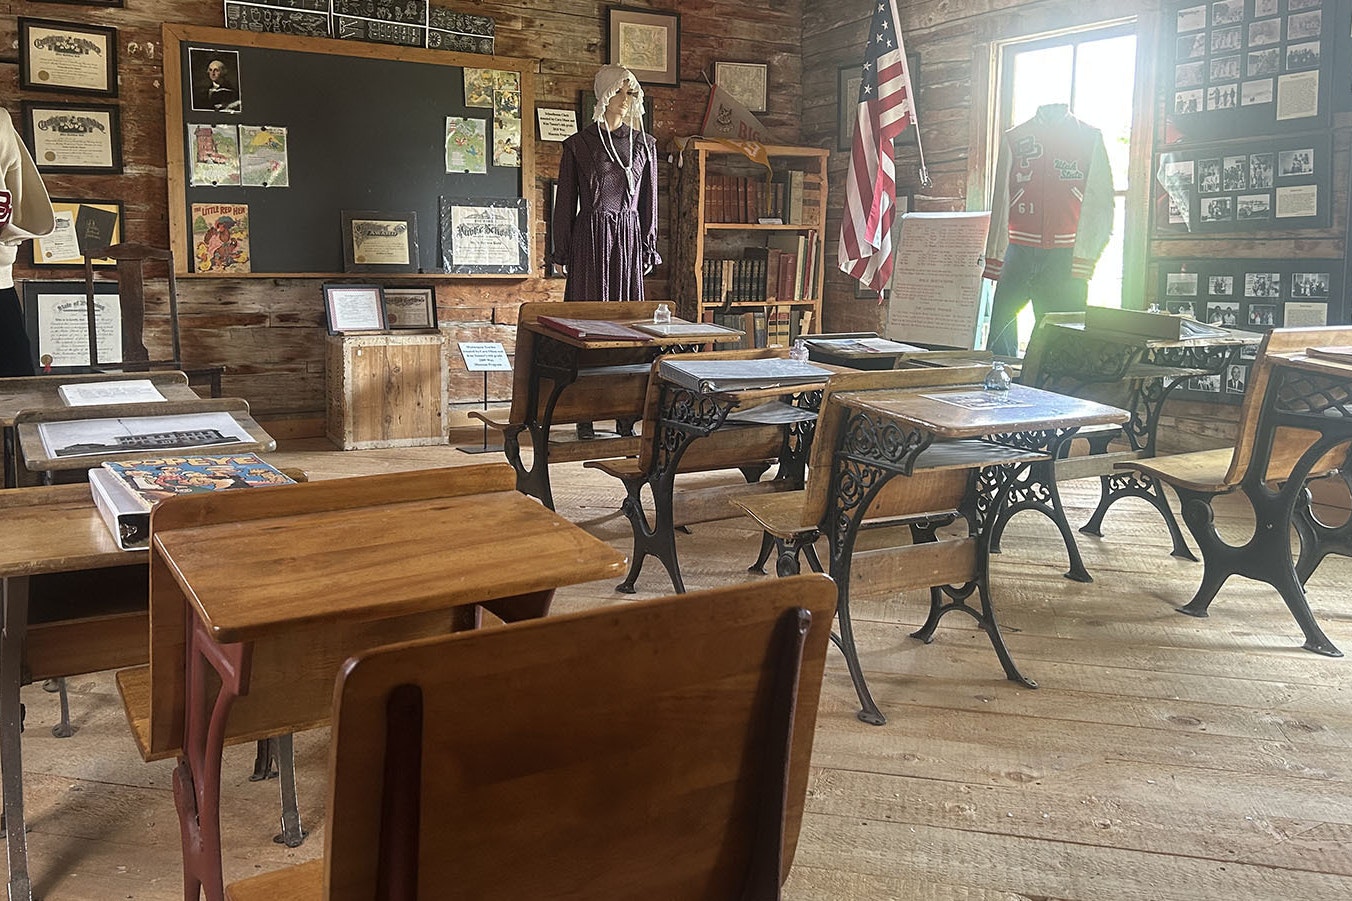 The Price/Sommers Schoolhouse at the Green River Valley Museum.